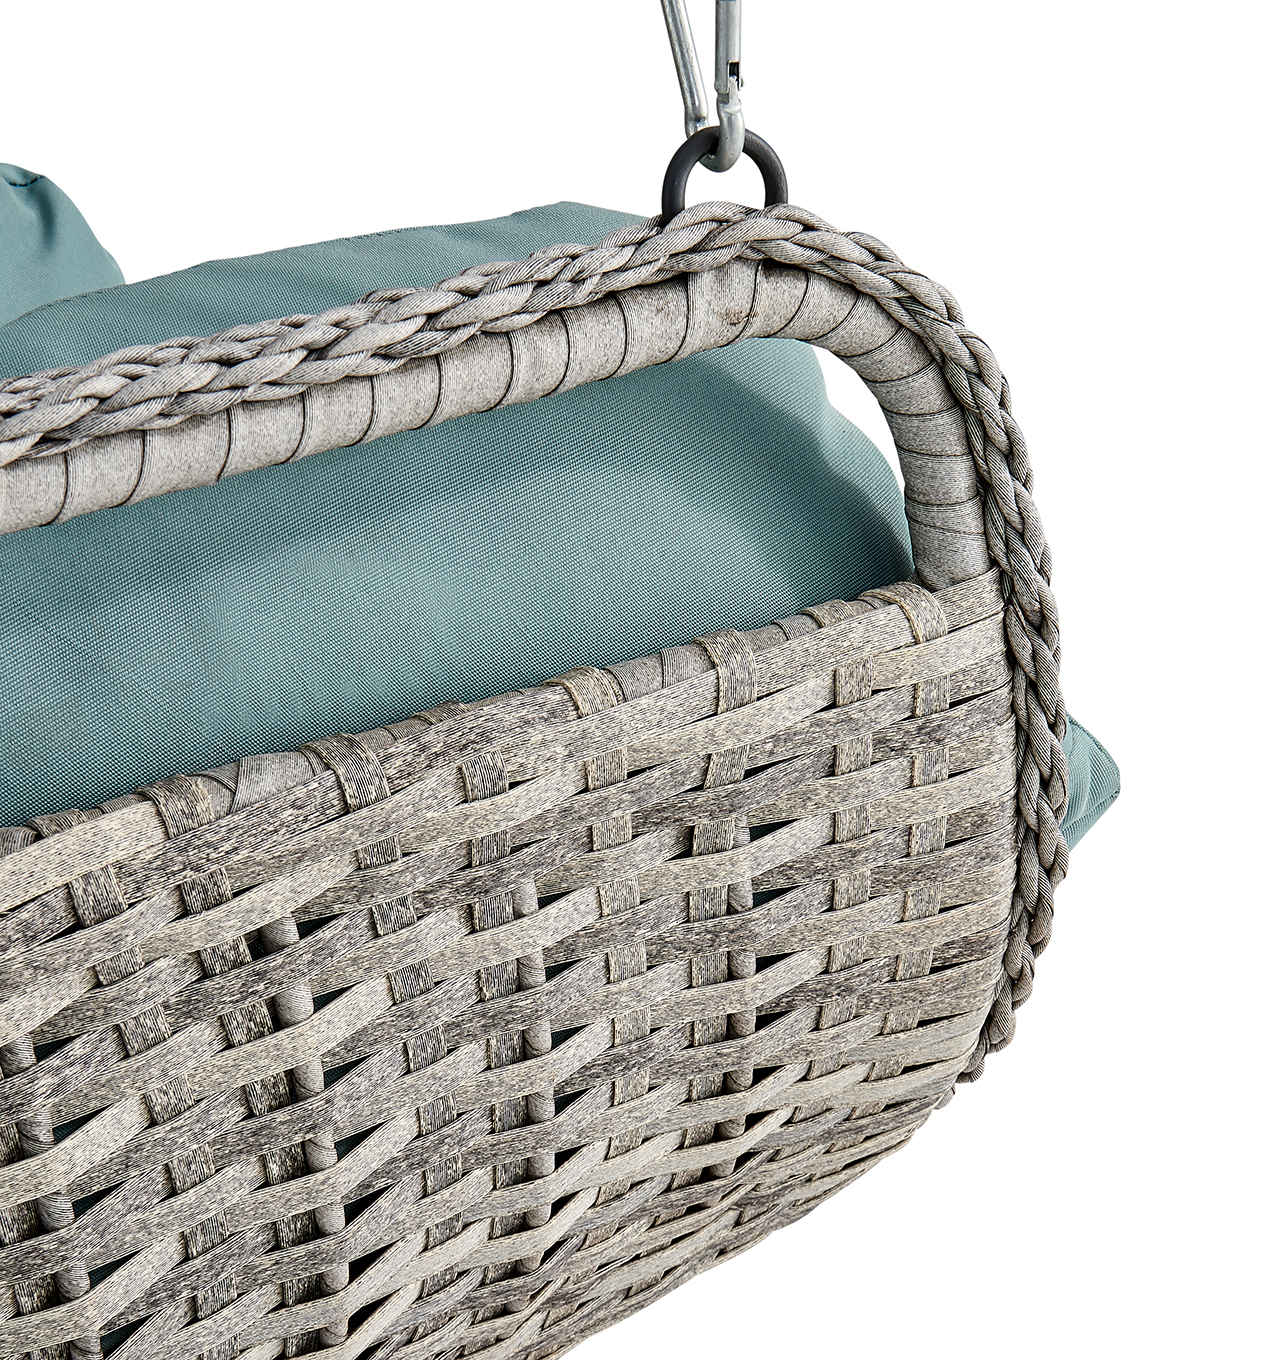 Outdoor Hanging Lounge Chair Backyard Patio Resin Wicker with Armrest Chair UV Resistant, Aqua - image 3 of 5